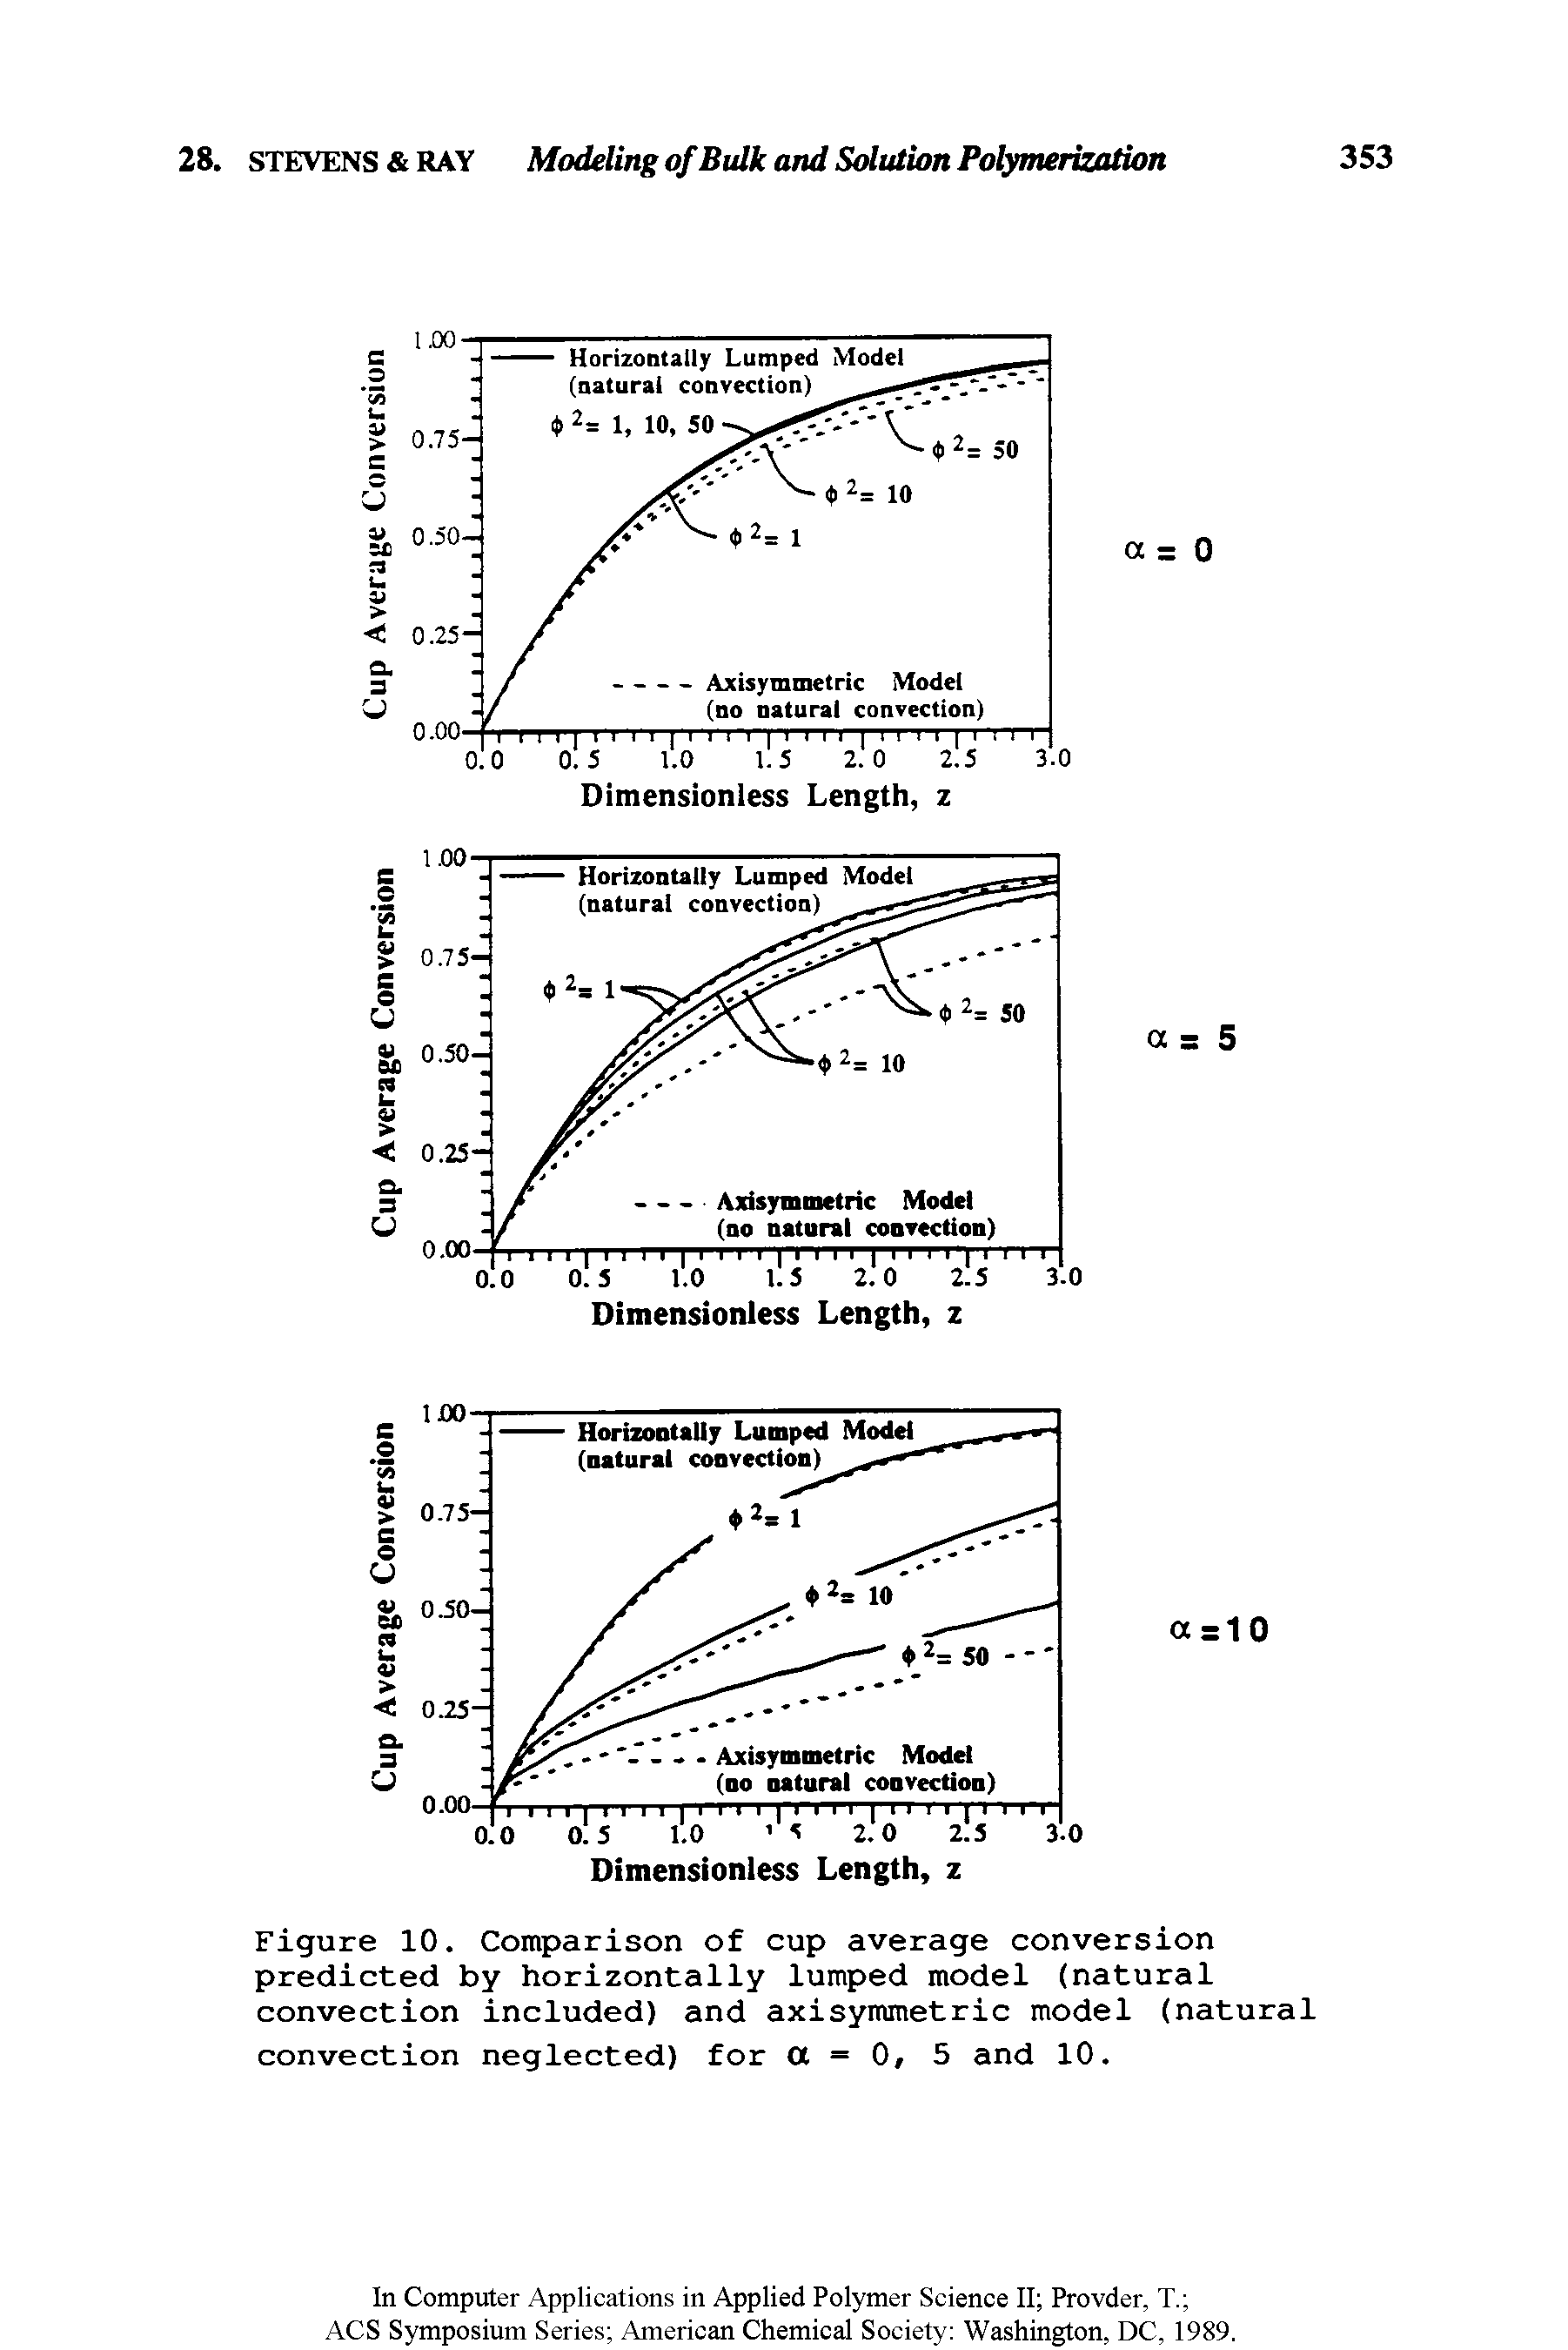 Figure 10. Comparison of cup average conversion predicted by horizontally lumped model (natural convection included) and axisymmetric model (natural convection neglected) for a = 0, 5 and 10.